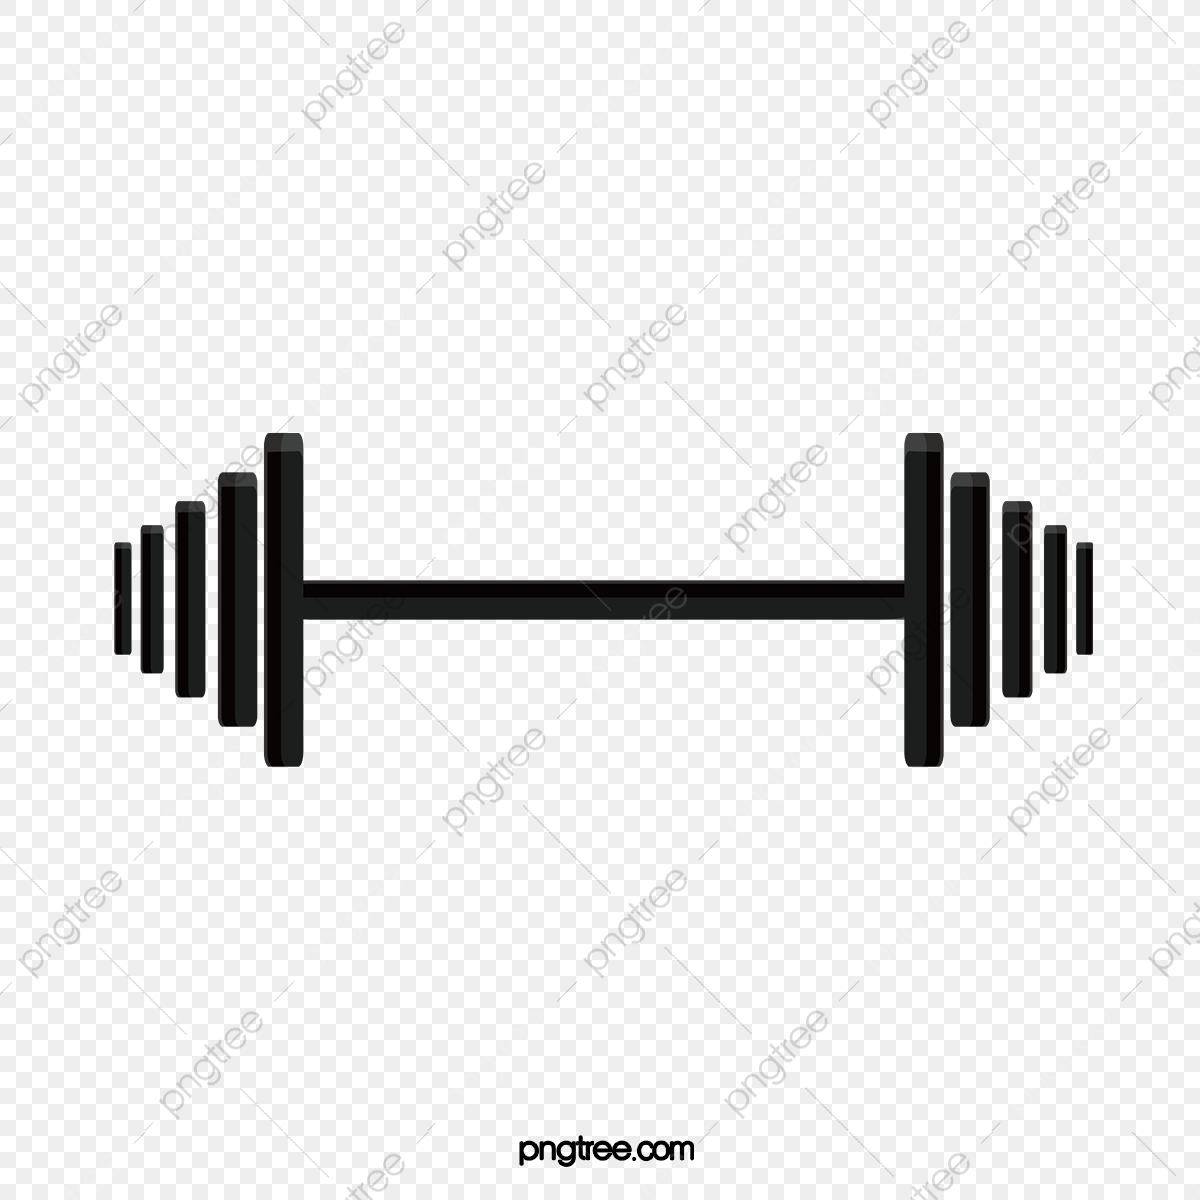 Dumbbell clipart icon. Barbell png 